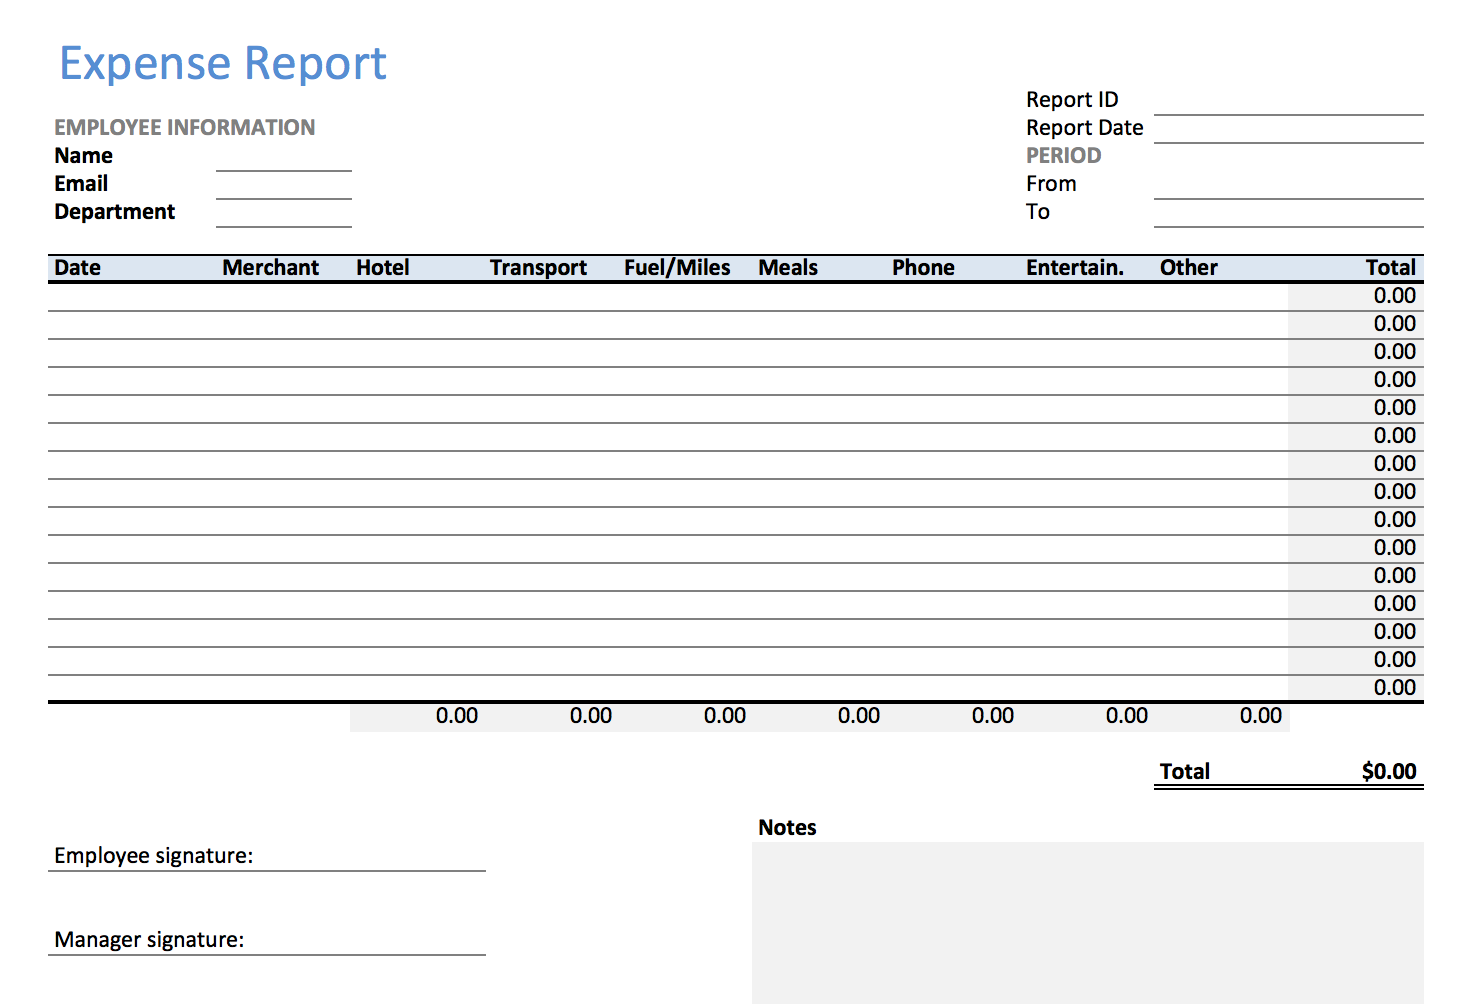 Excel Expense Report Template - KEEPEK Inside Expense Report Spreadsheet Template Excel